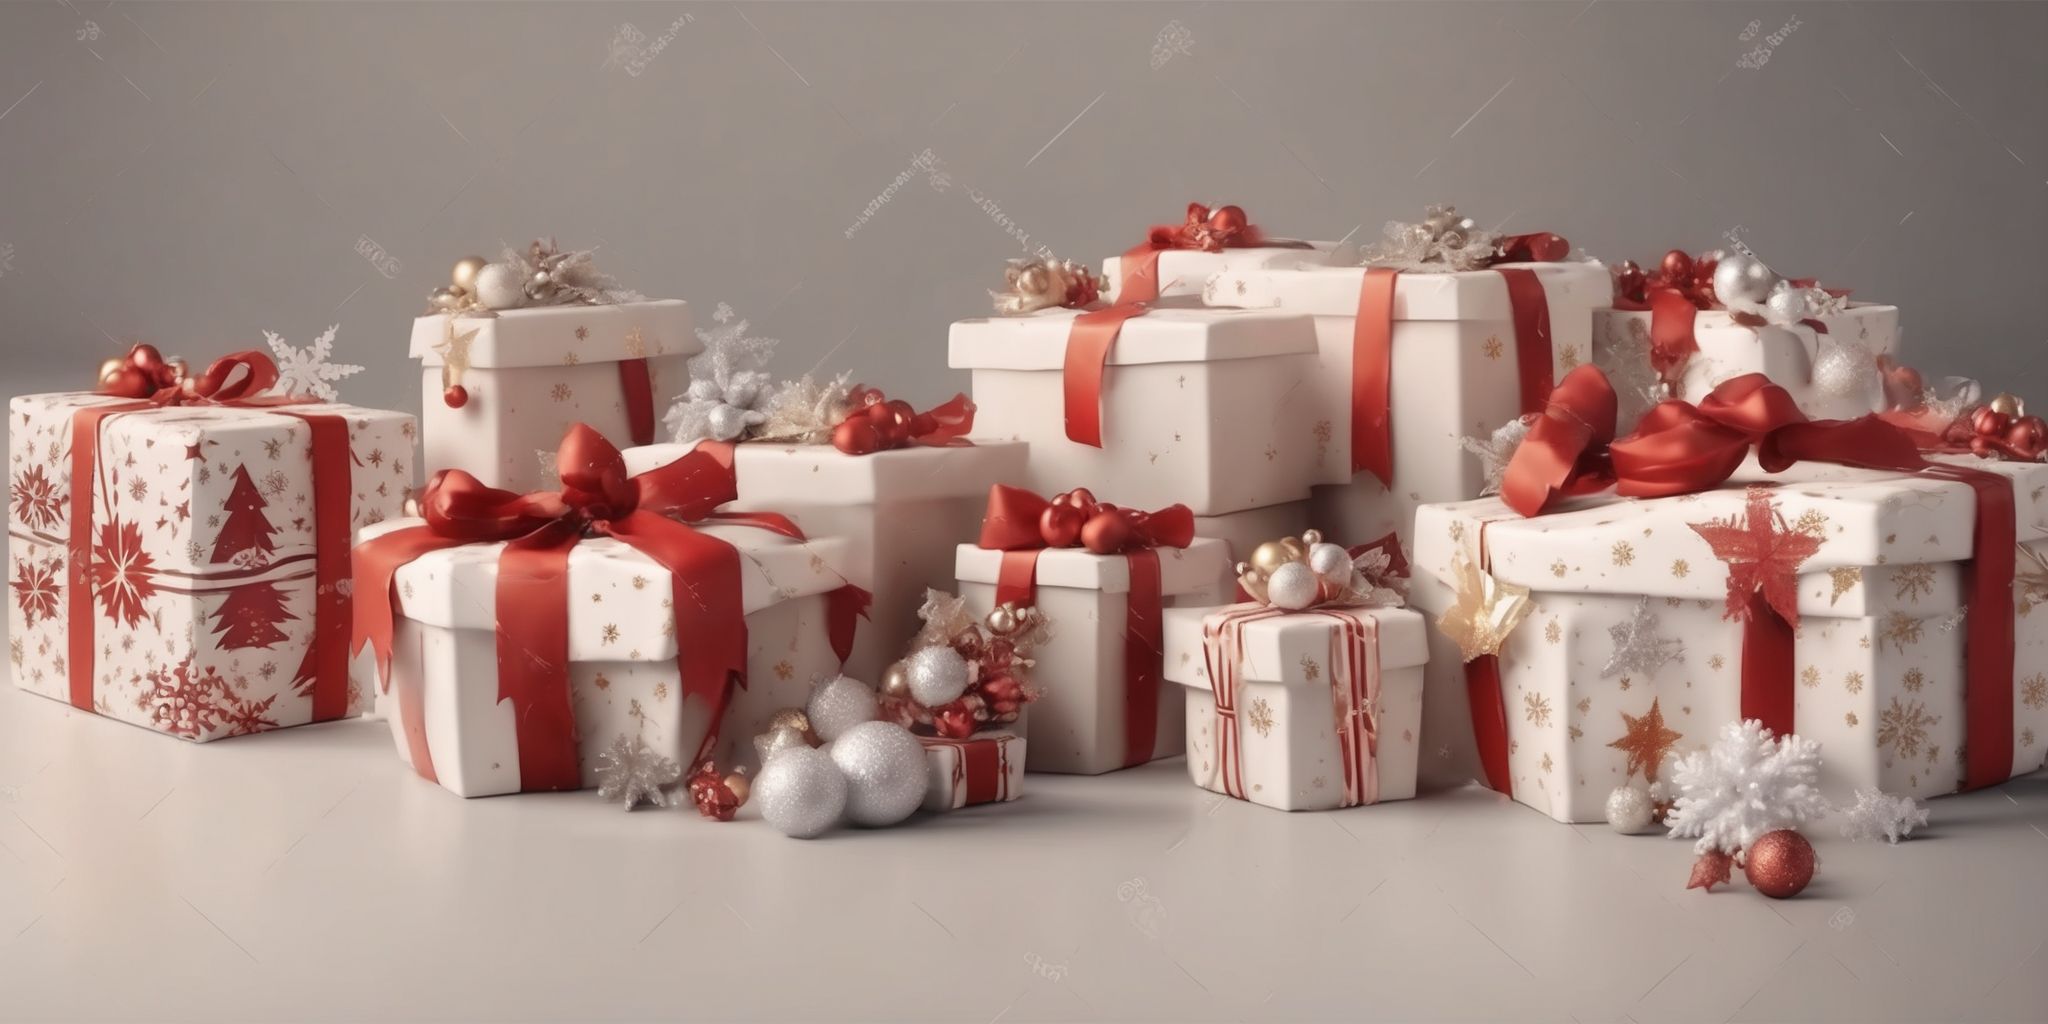 Boxes in realistic Christmas style